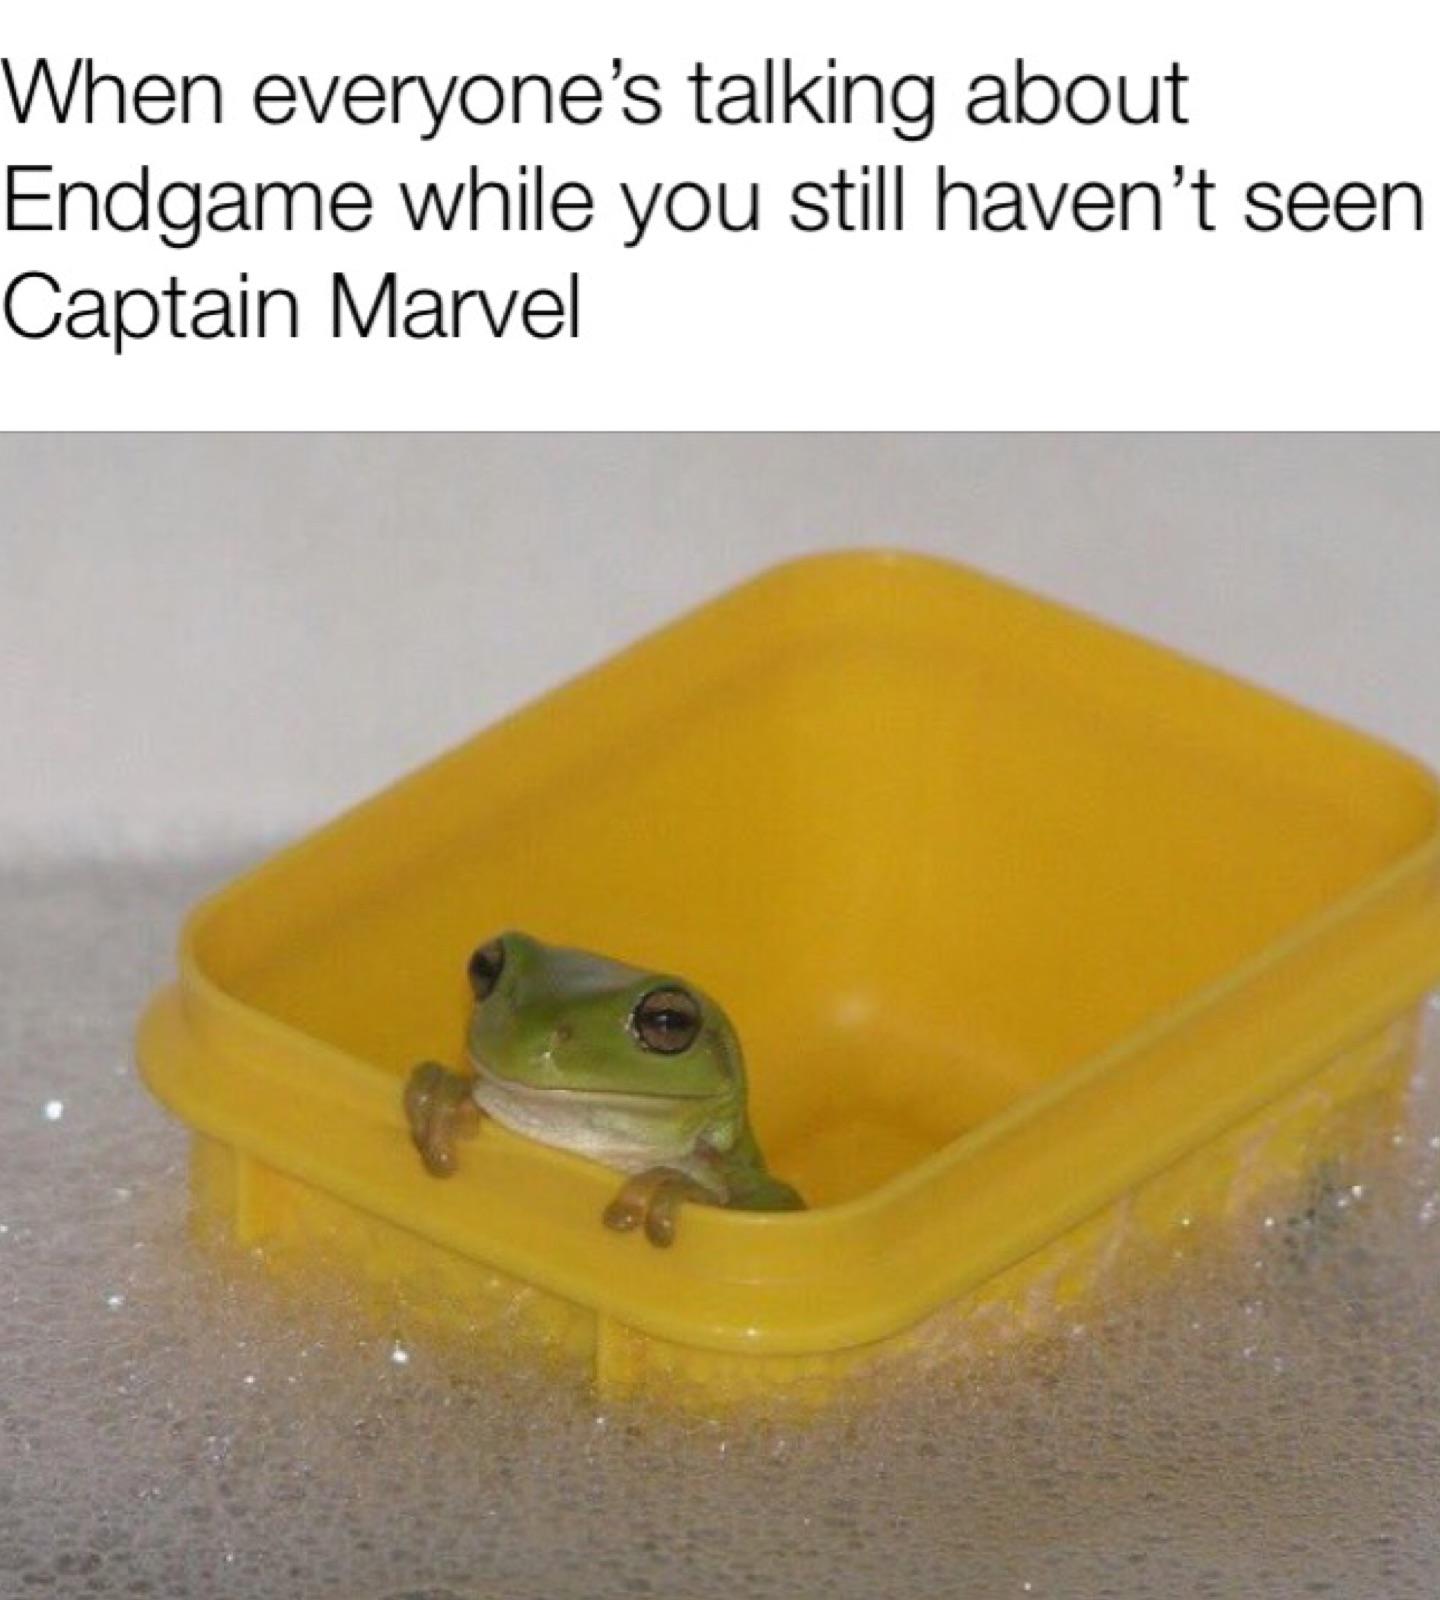 Avengers Endgame memes - plastic - When everyone's talking about Endgame while you still haven't seen Captain Marvel